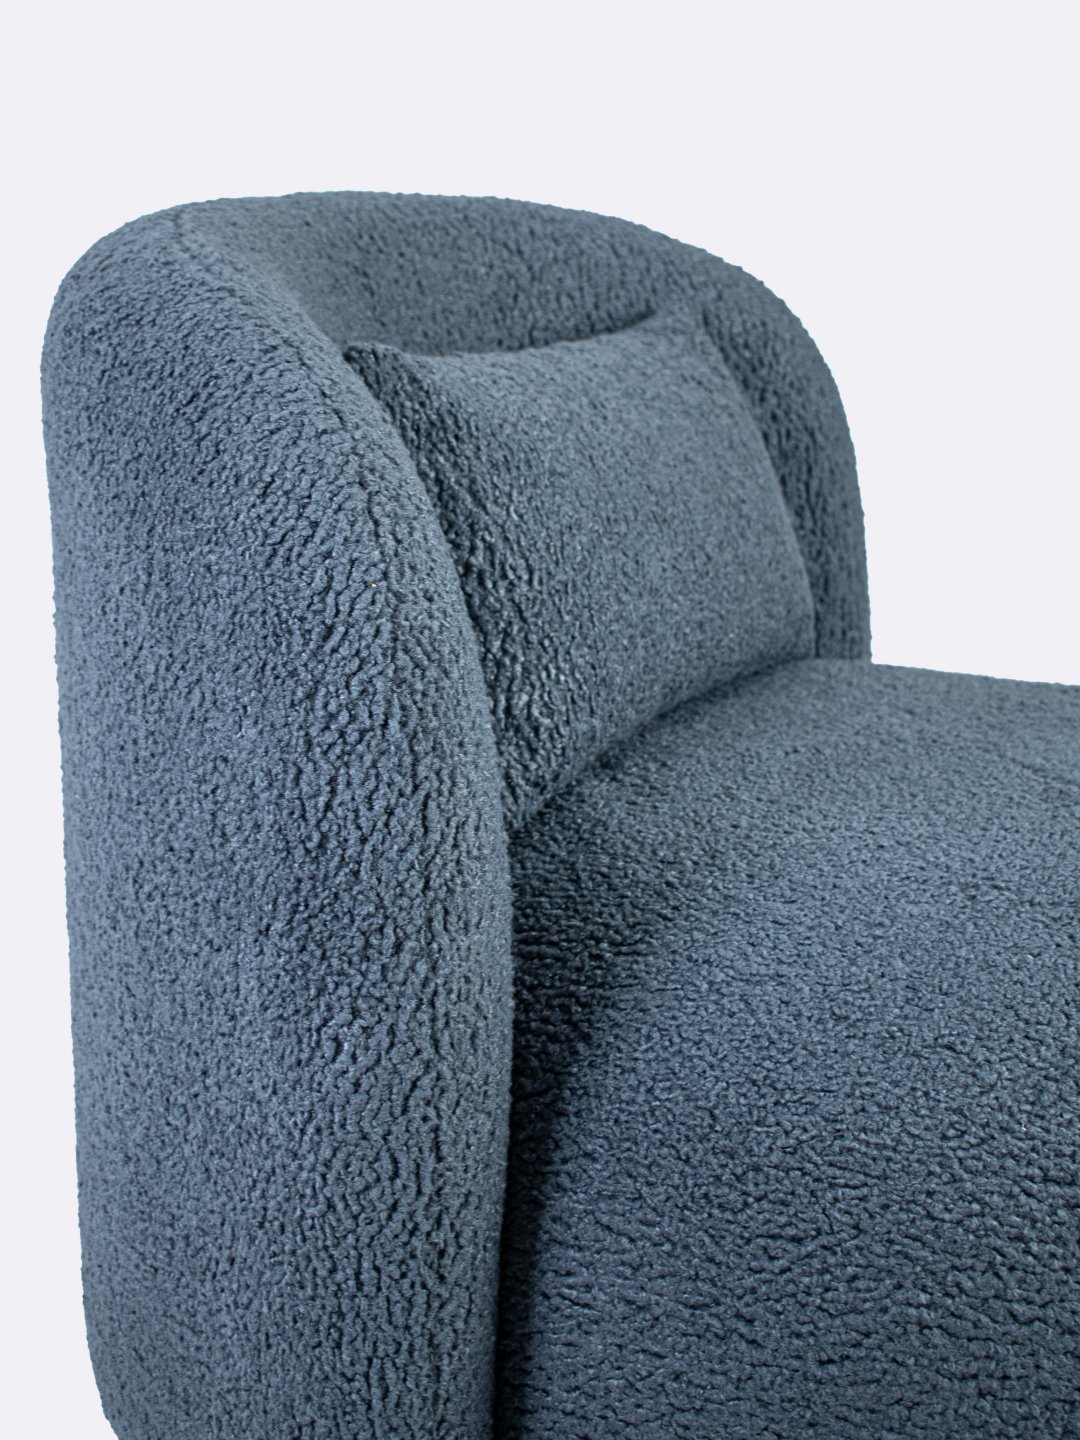 Felipe Lounge Chair - The Rug Collection